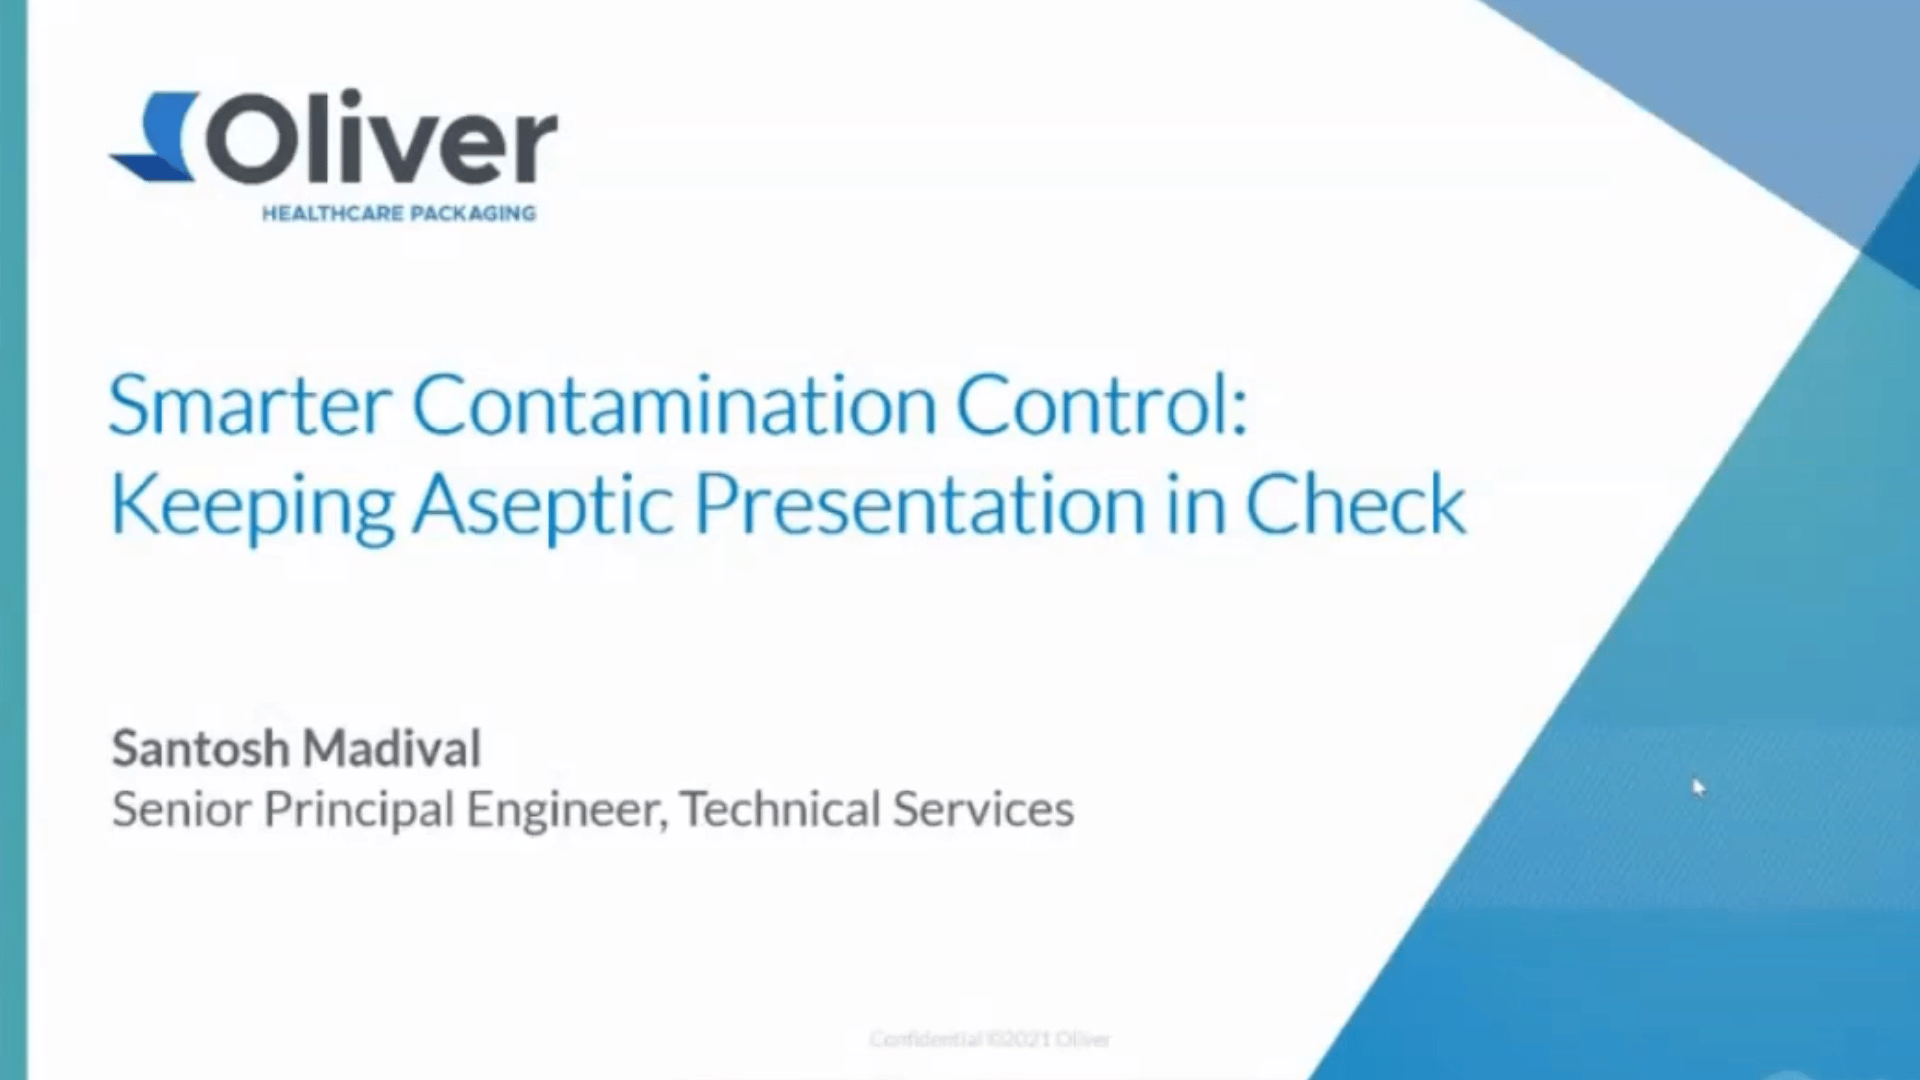 Smarter Contamination Control: Keeping Aseptic Presentation in Check